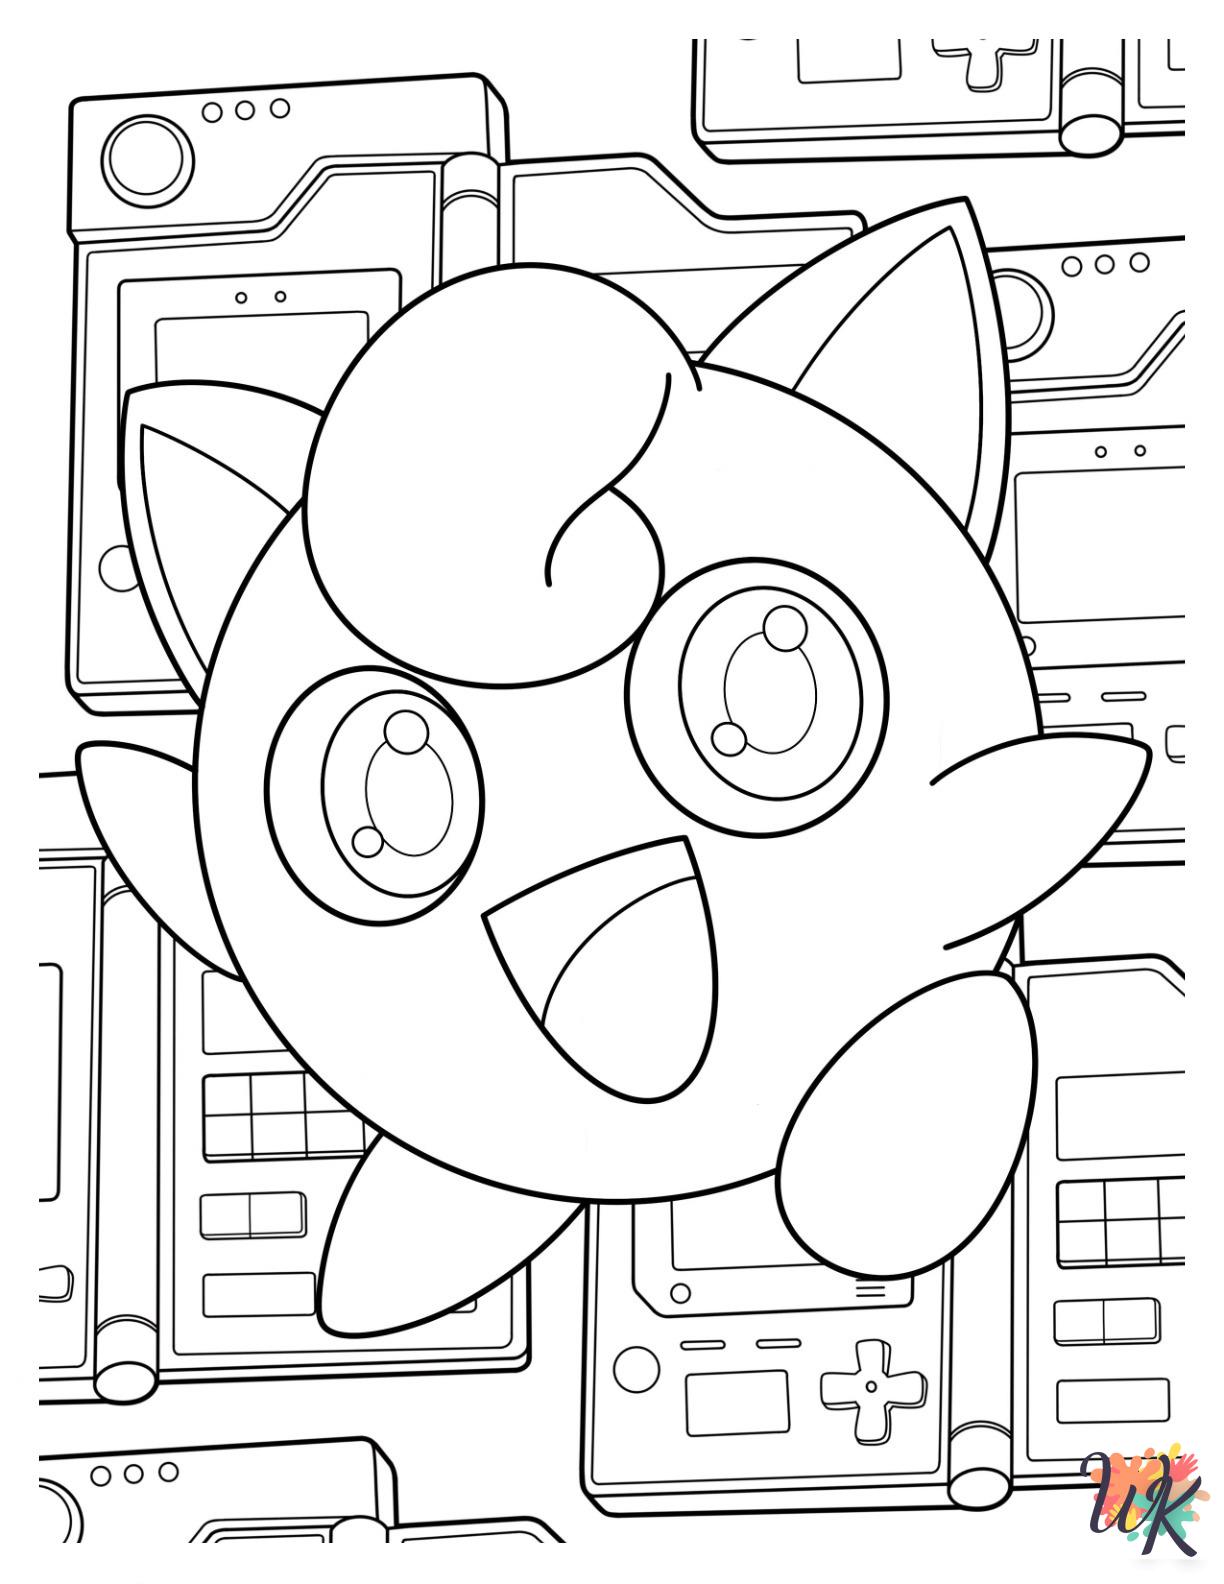 Jigglypuff adult coloring pages